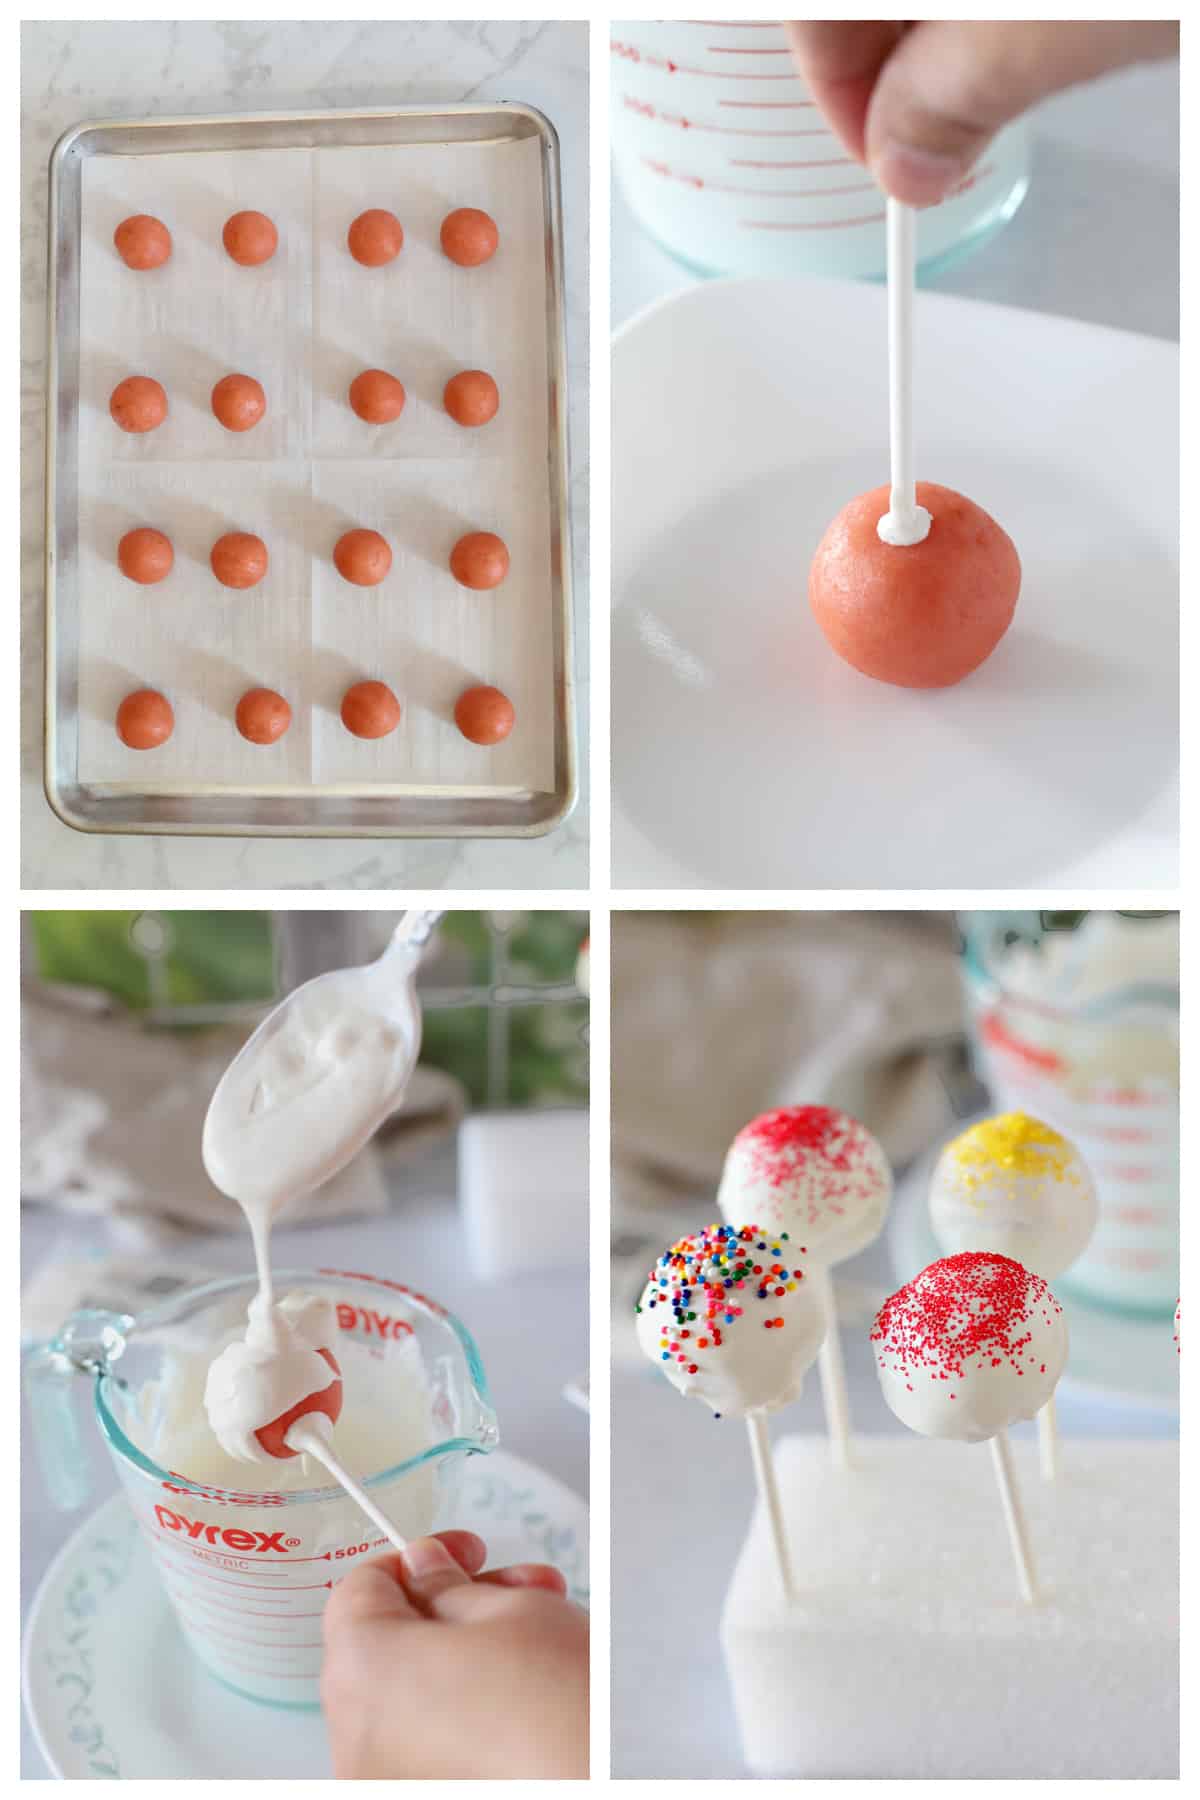 A collage of 4 images showing how to frost cake pops with candy melts.